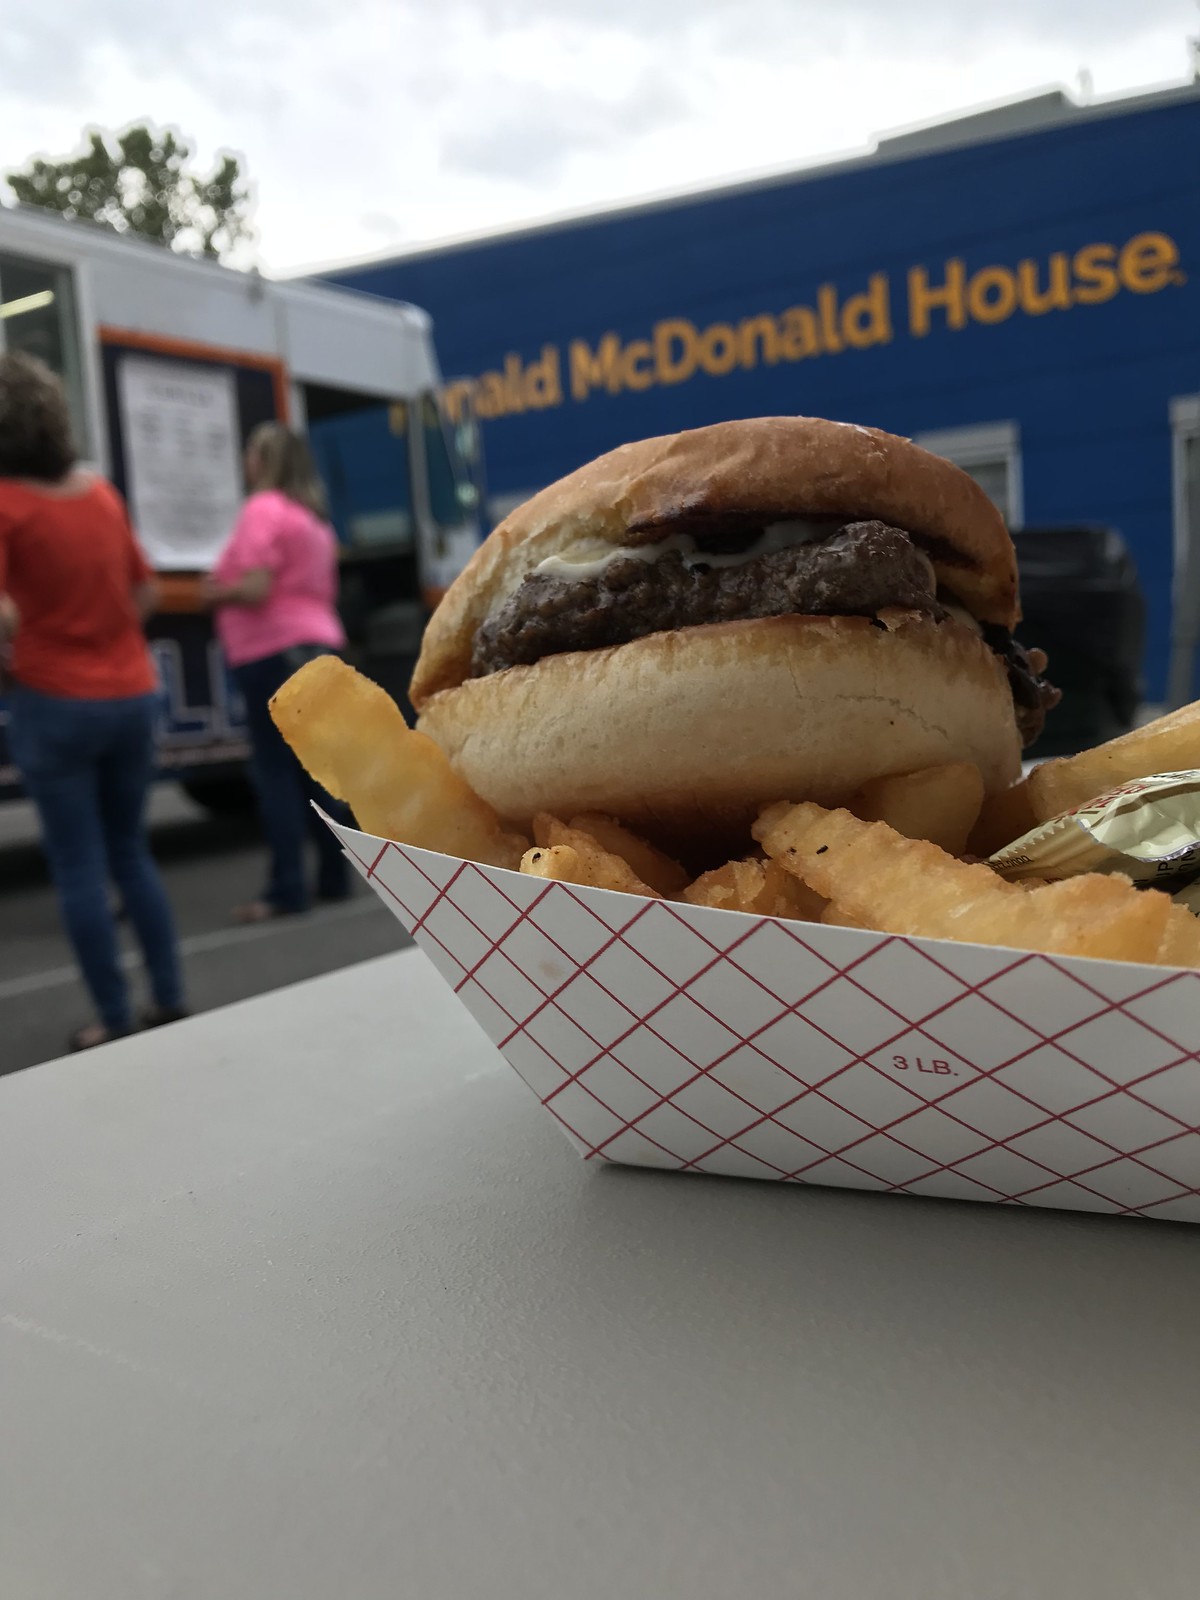 Food truck Friday - sideline grill